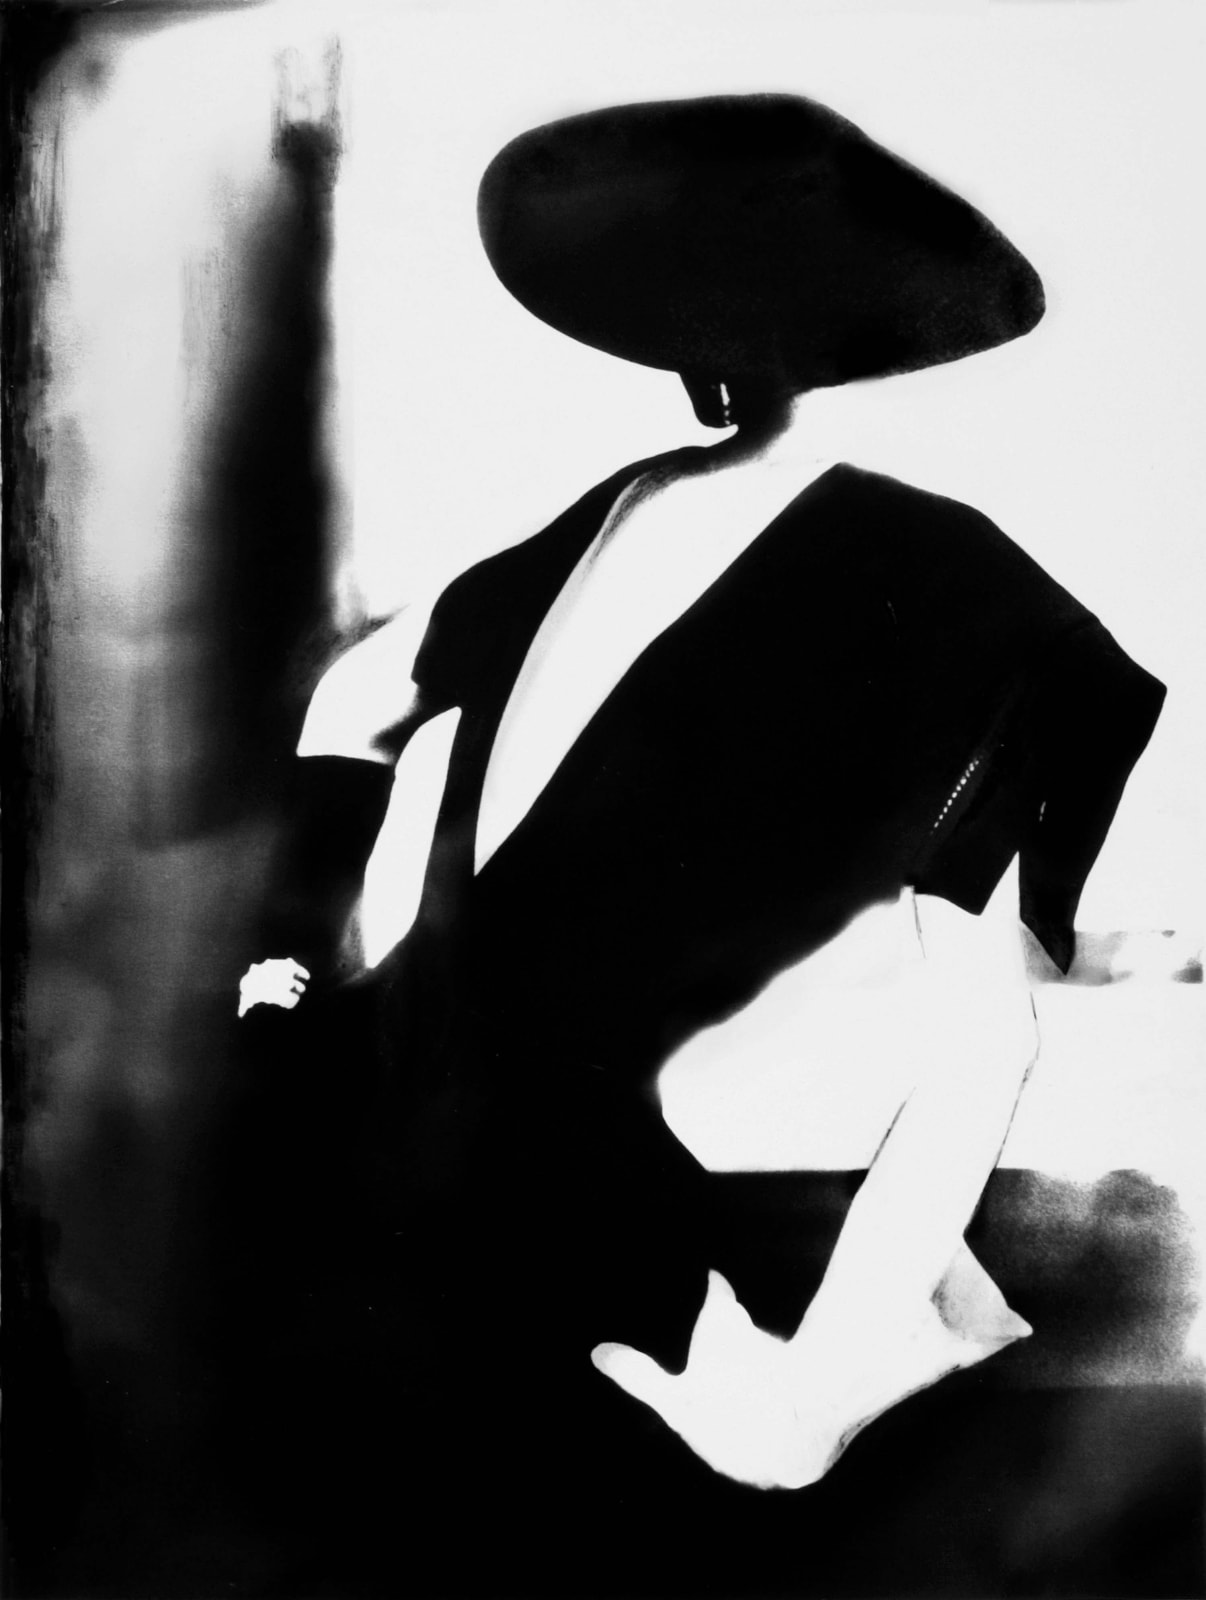 Lillian Bassman photograph of model Barbara Mullen wearing Christian Dior dress with V-neck back, black hat, and one white glove